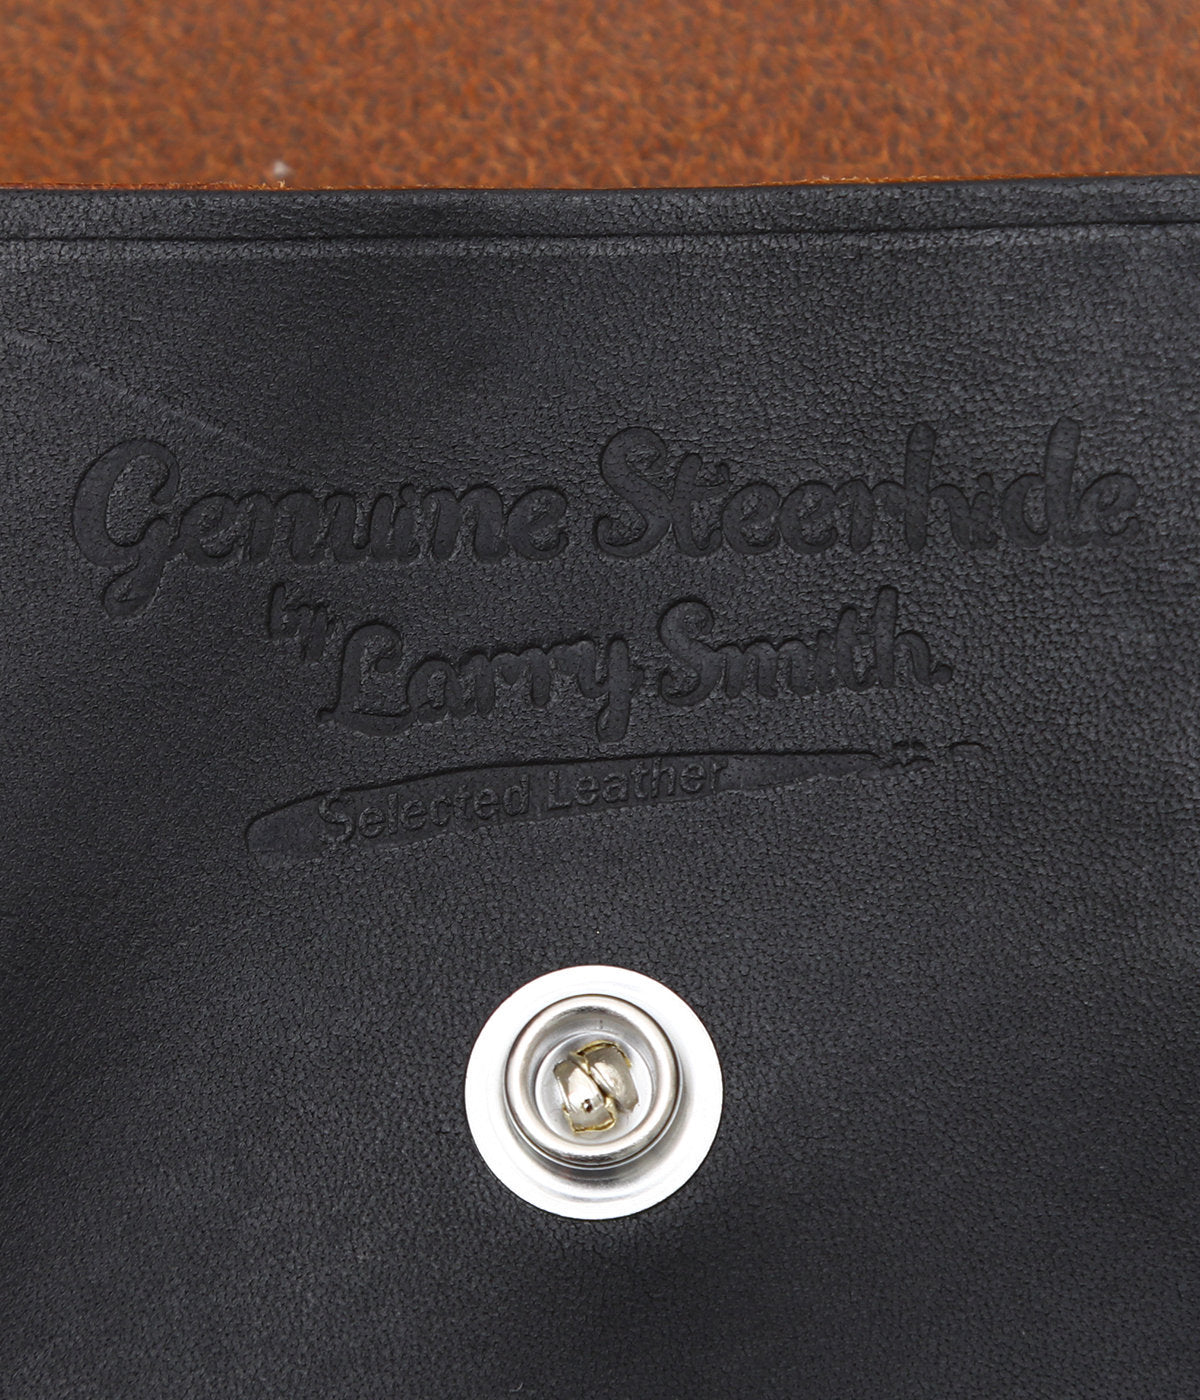 LARRY SMITH COIN CASE No. 2 (TUQ SHELL) – unexpected store